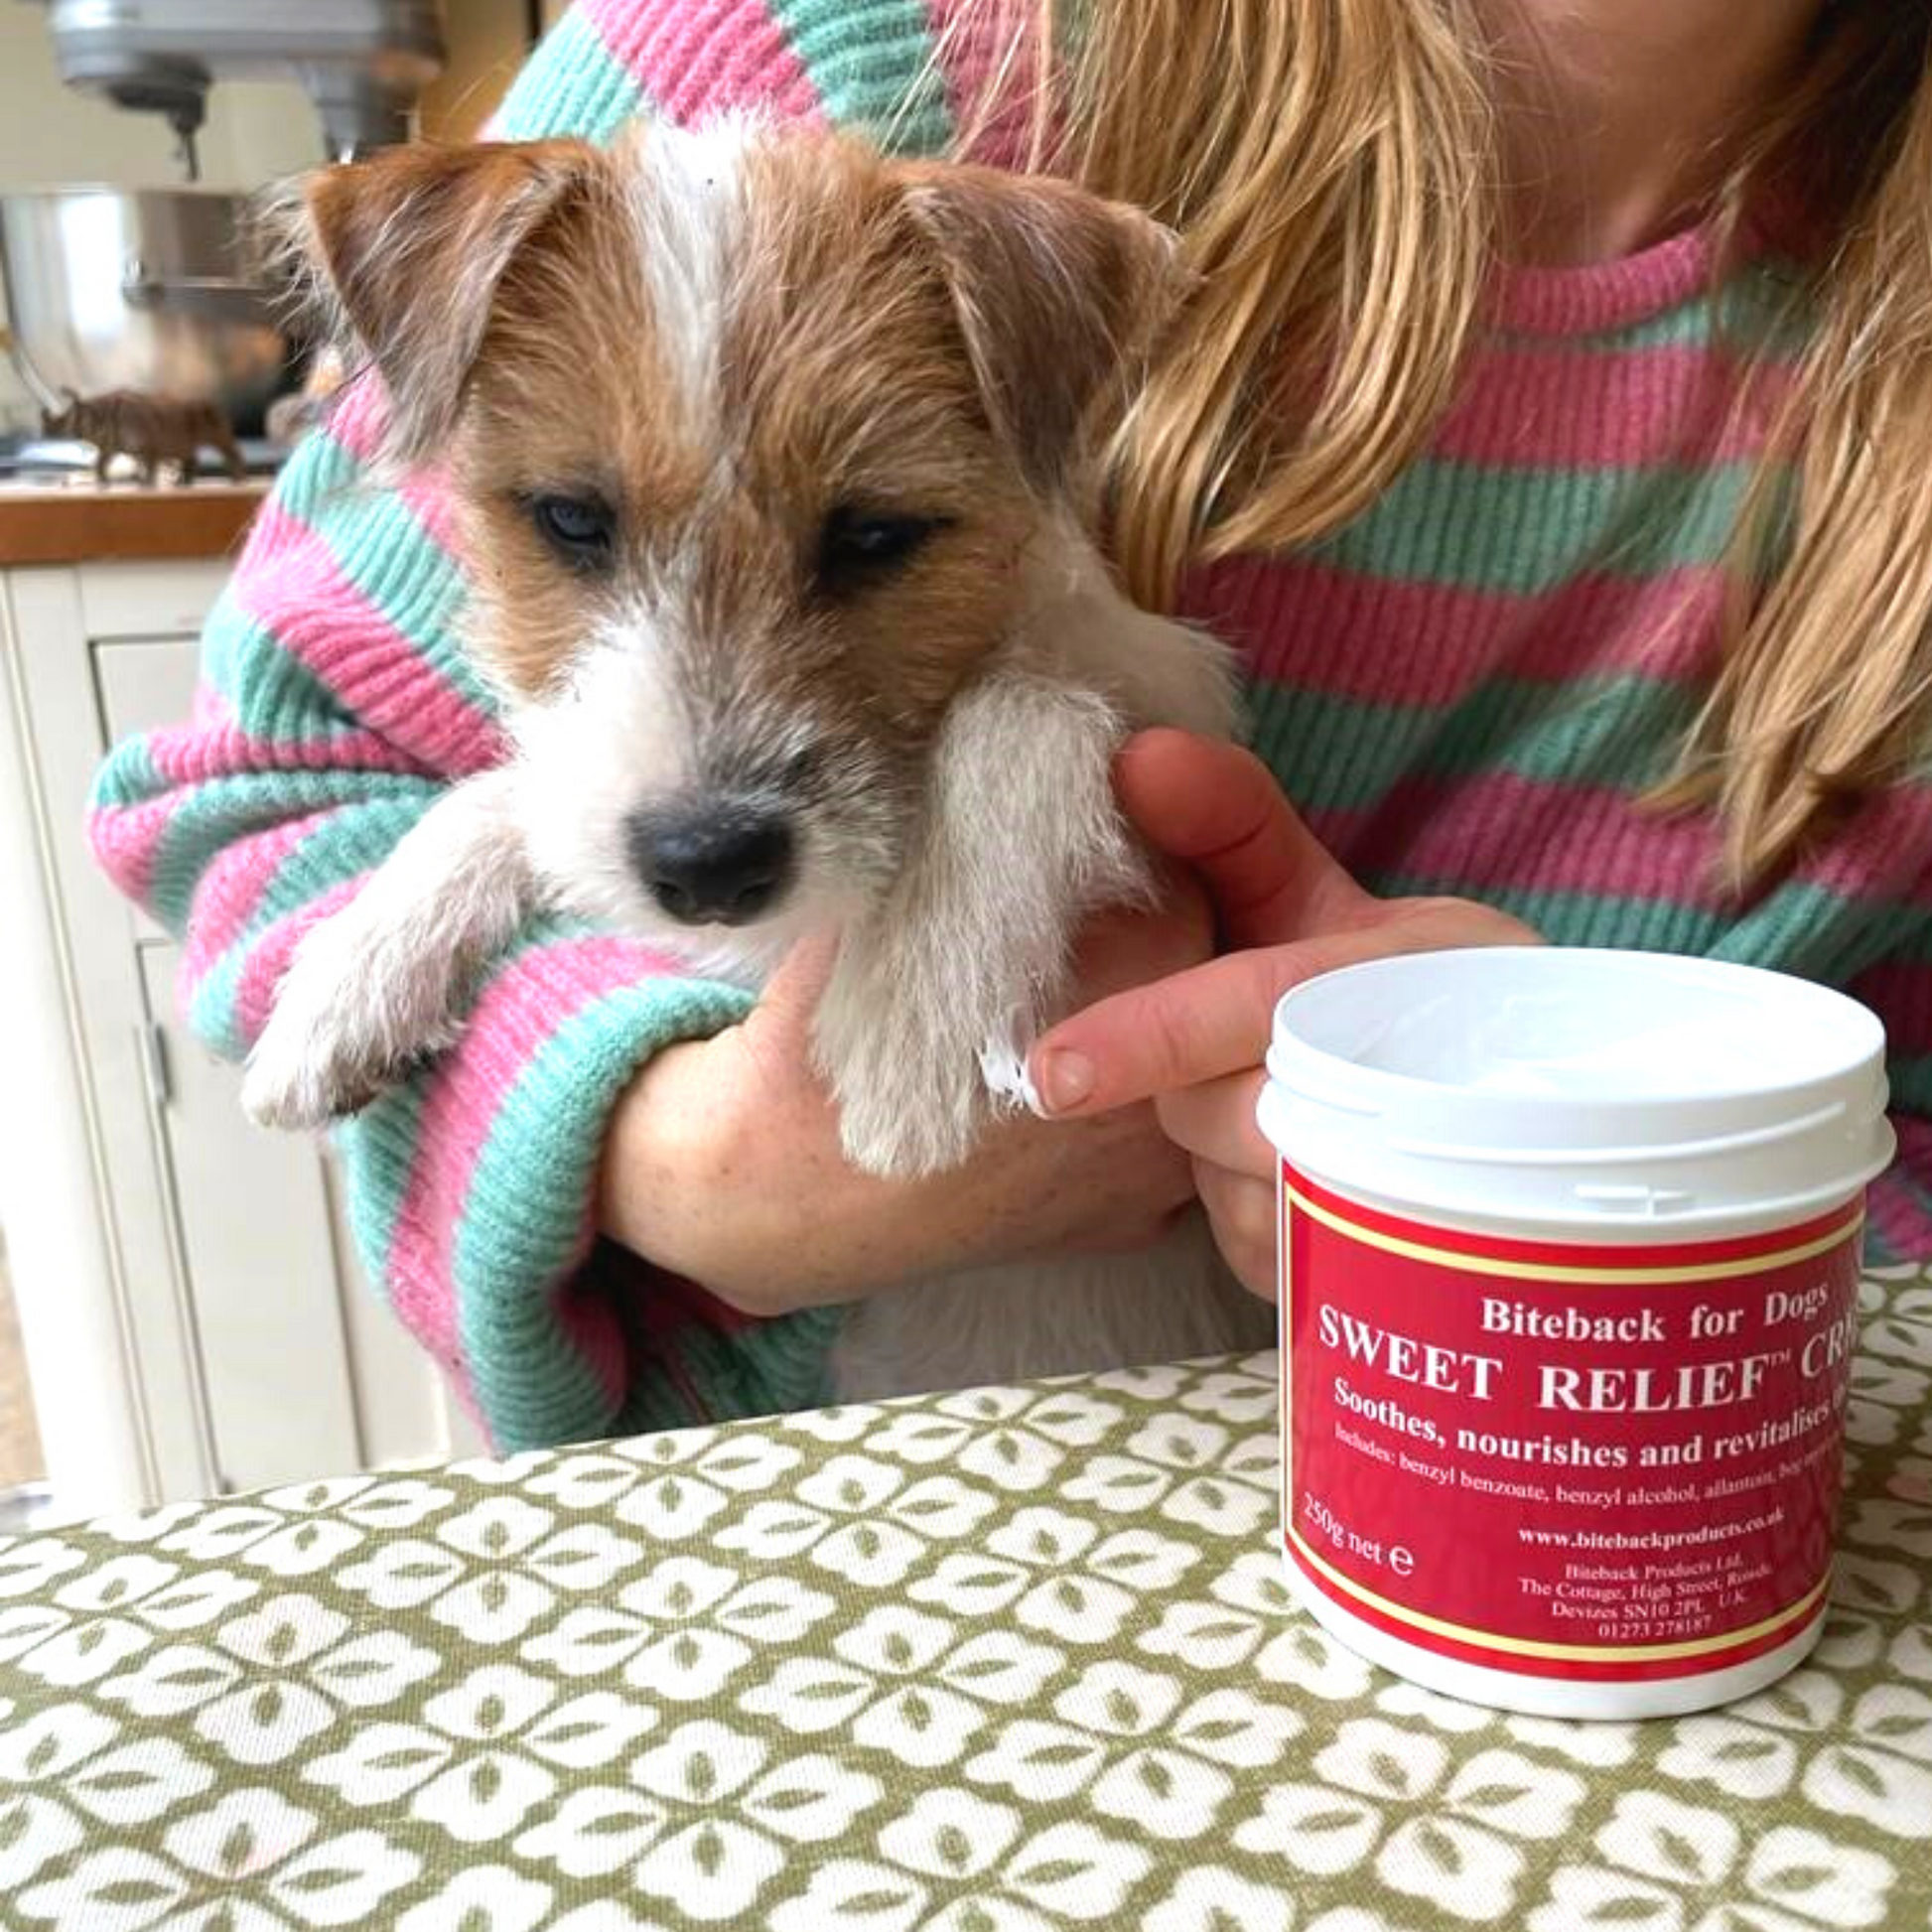 Biteback dog cream is suitable for dog's itchy skin and is an ideal paw balm.